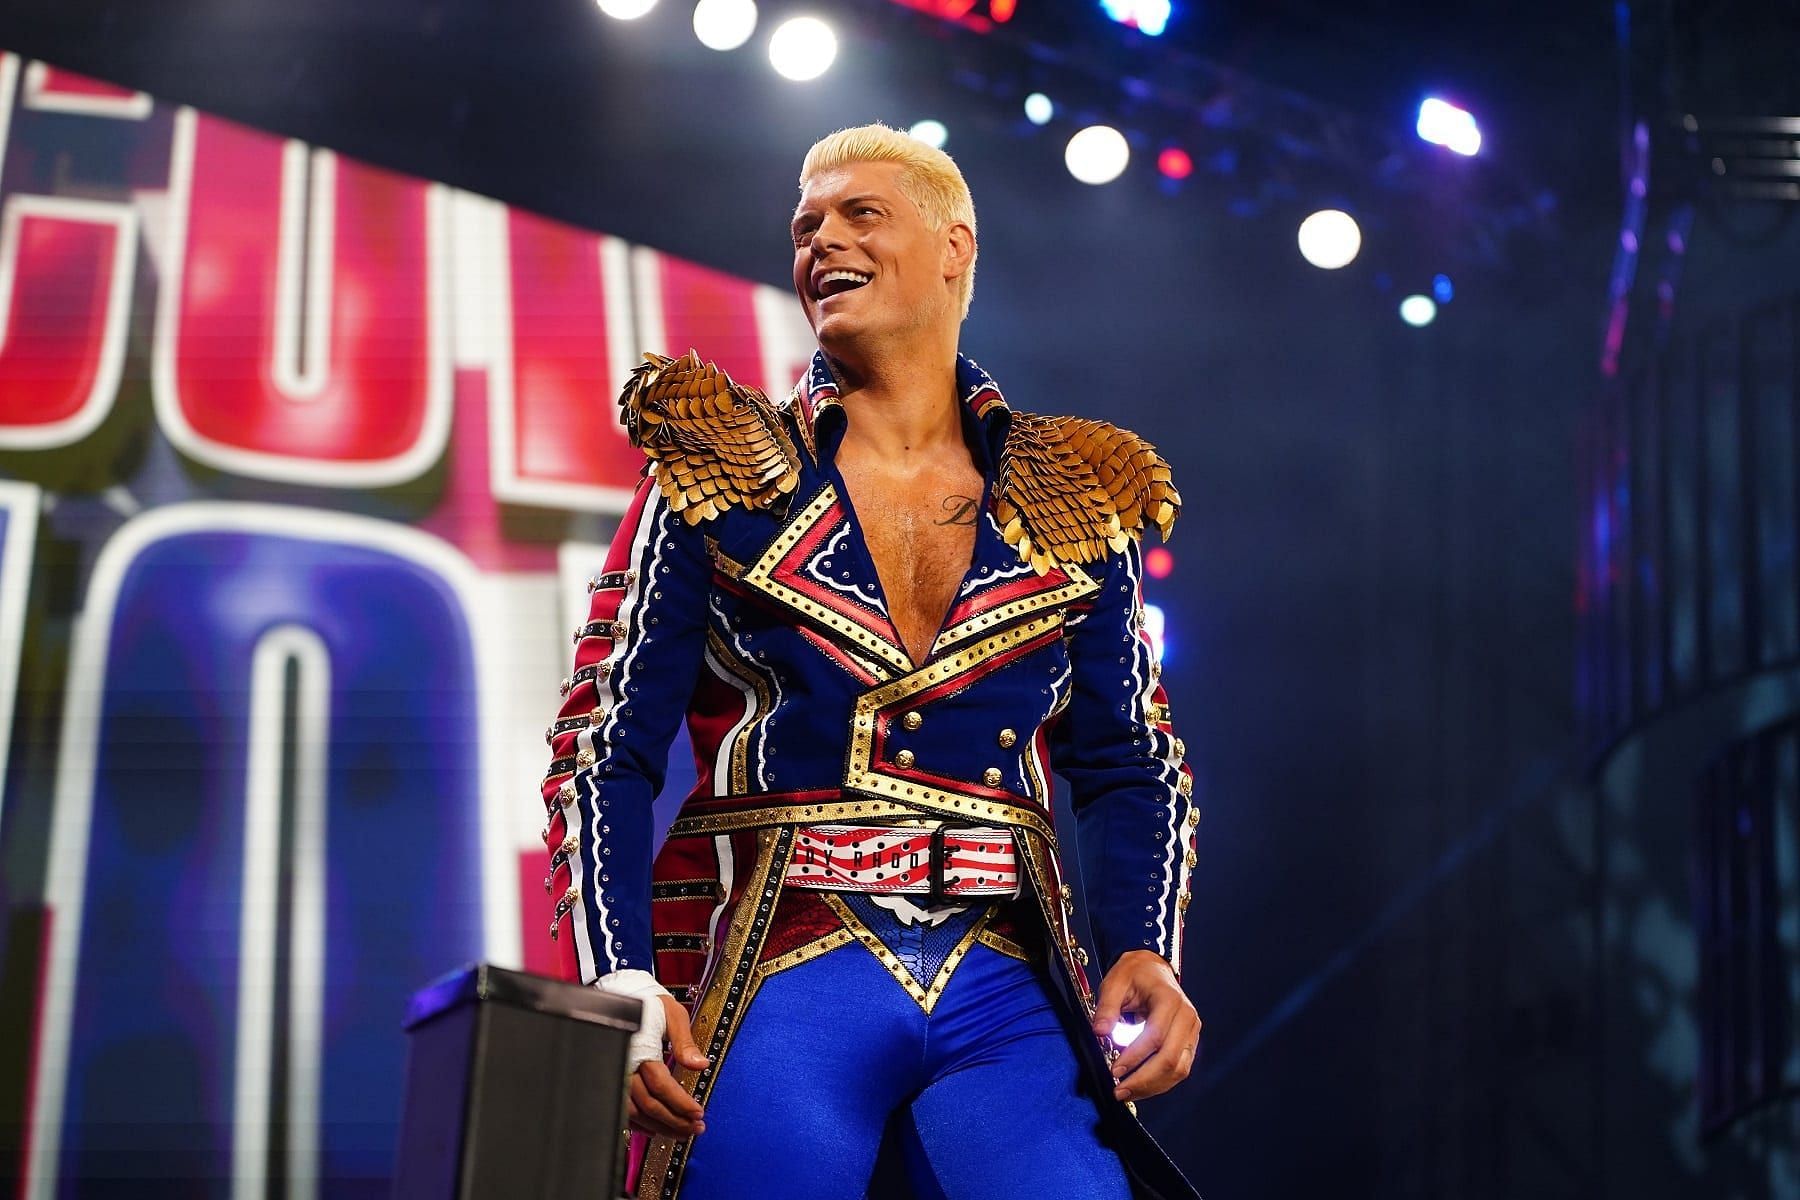 Cody Rhodes has become the hottest topic in professional wrestling.